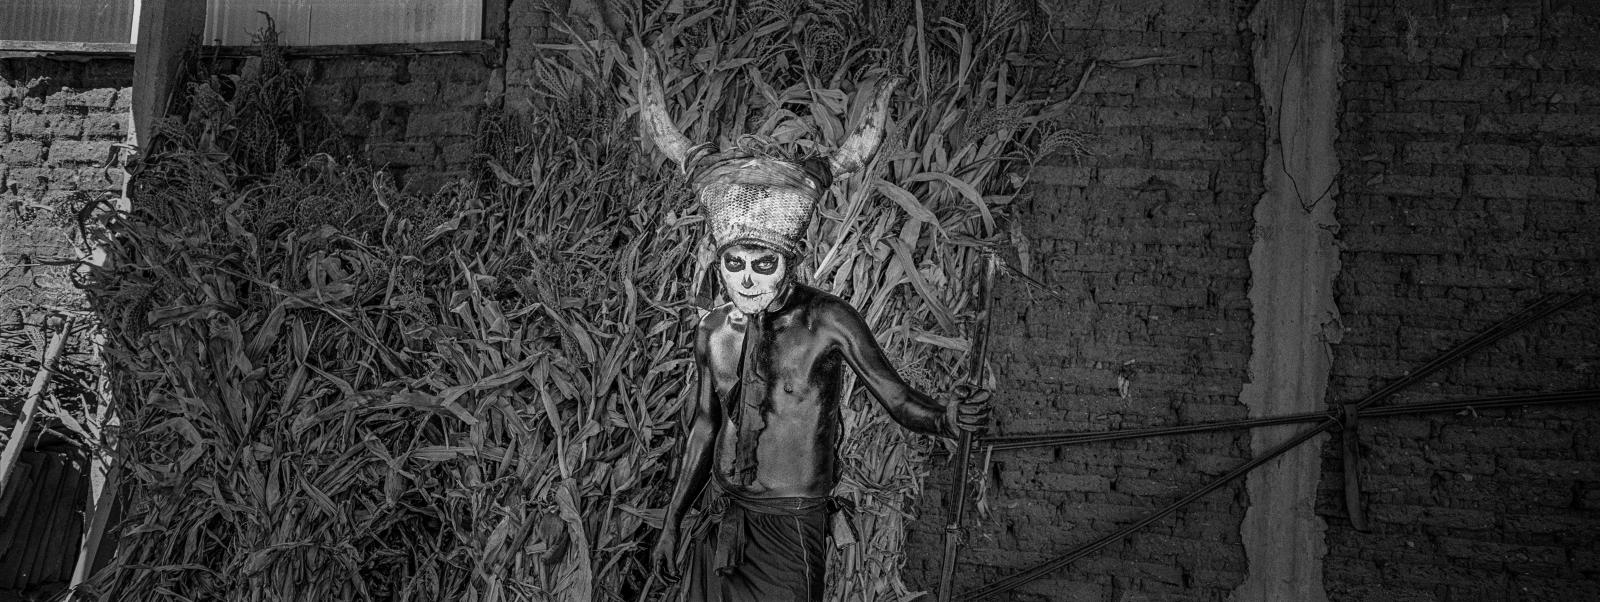 Carnaval in San Martin Tilcajete using a Hasselblad Xpan for black and white panoramic photos. February 2015